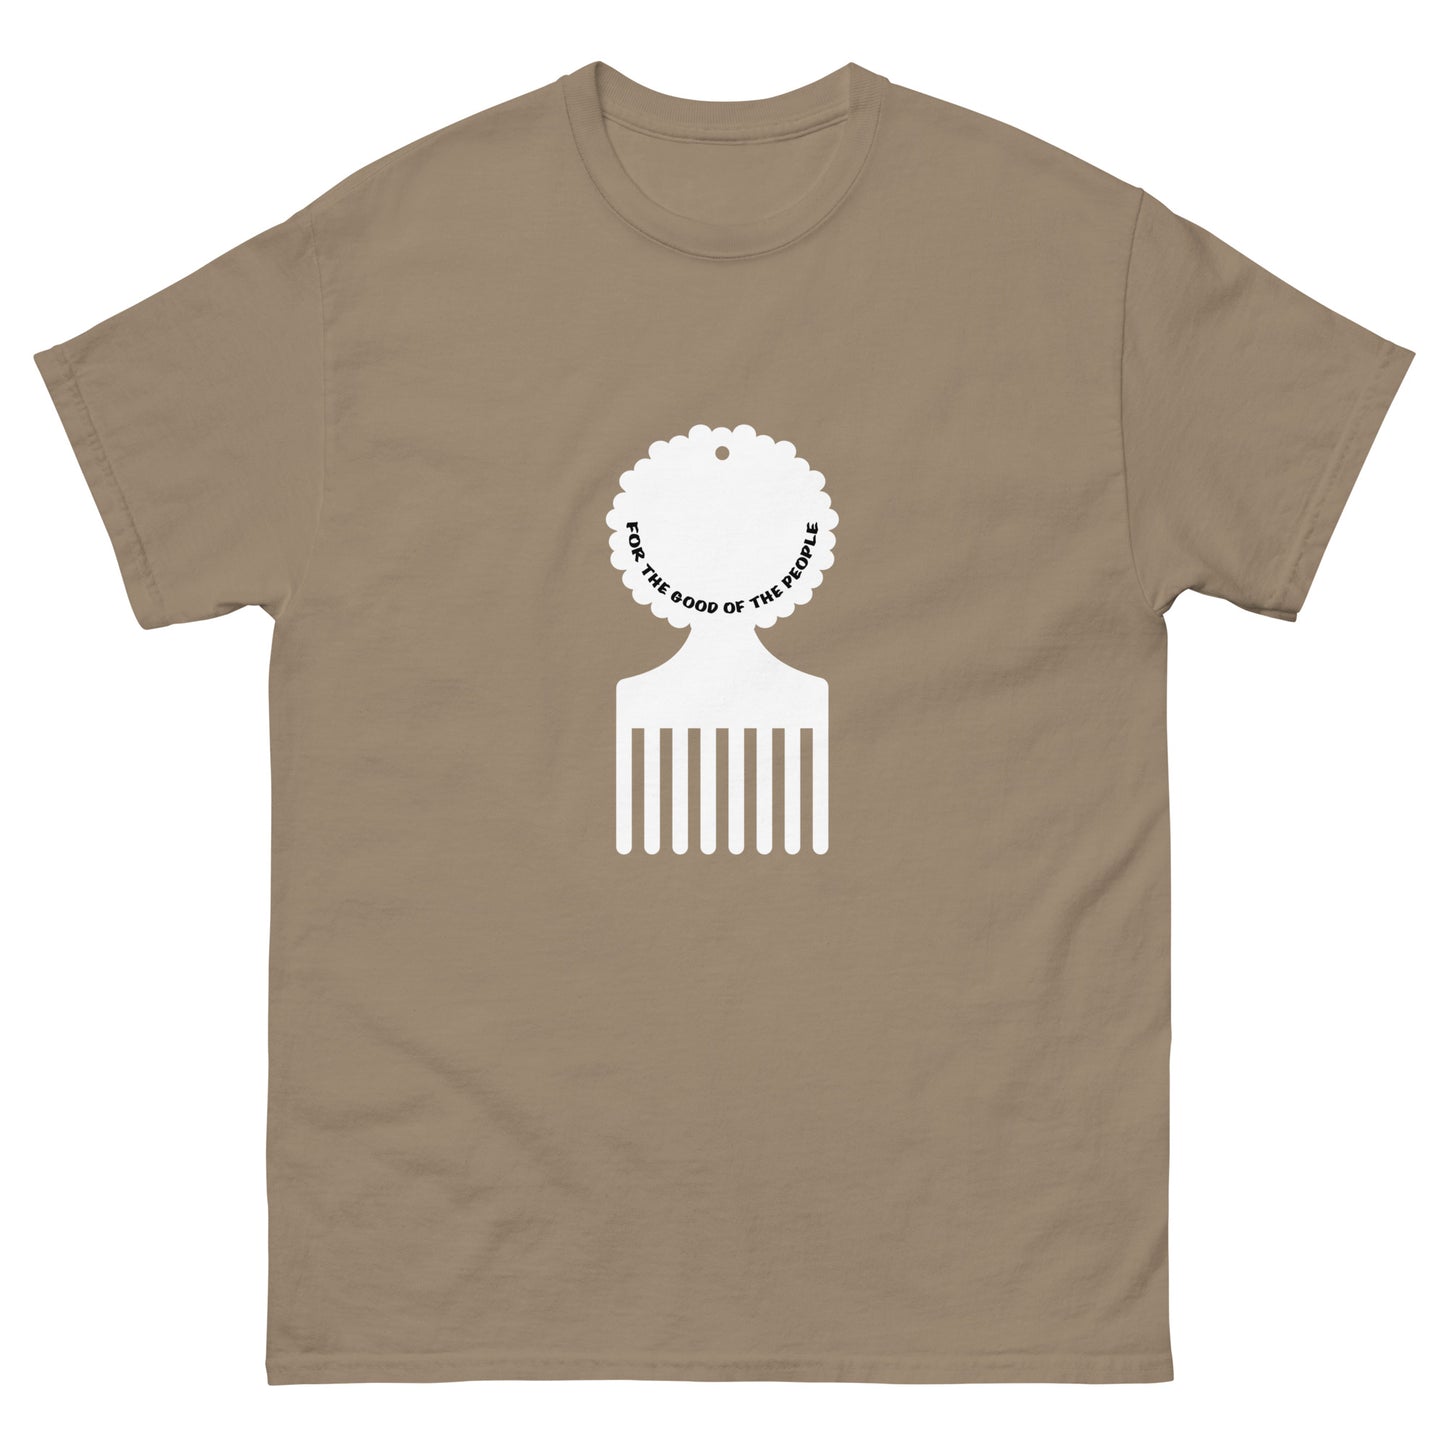 Men's brown savana tee with white afro pick in the center of shirt, with for the good of the people in white inside the afro pick's handle.